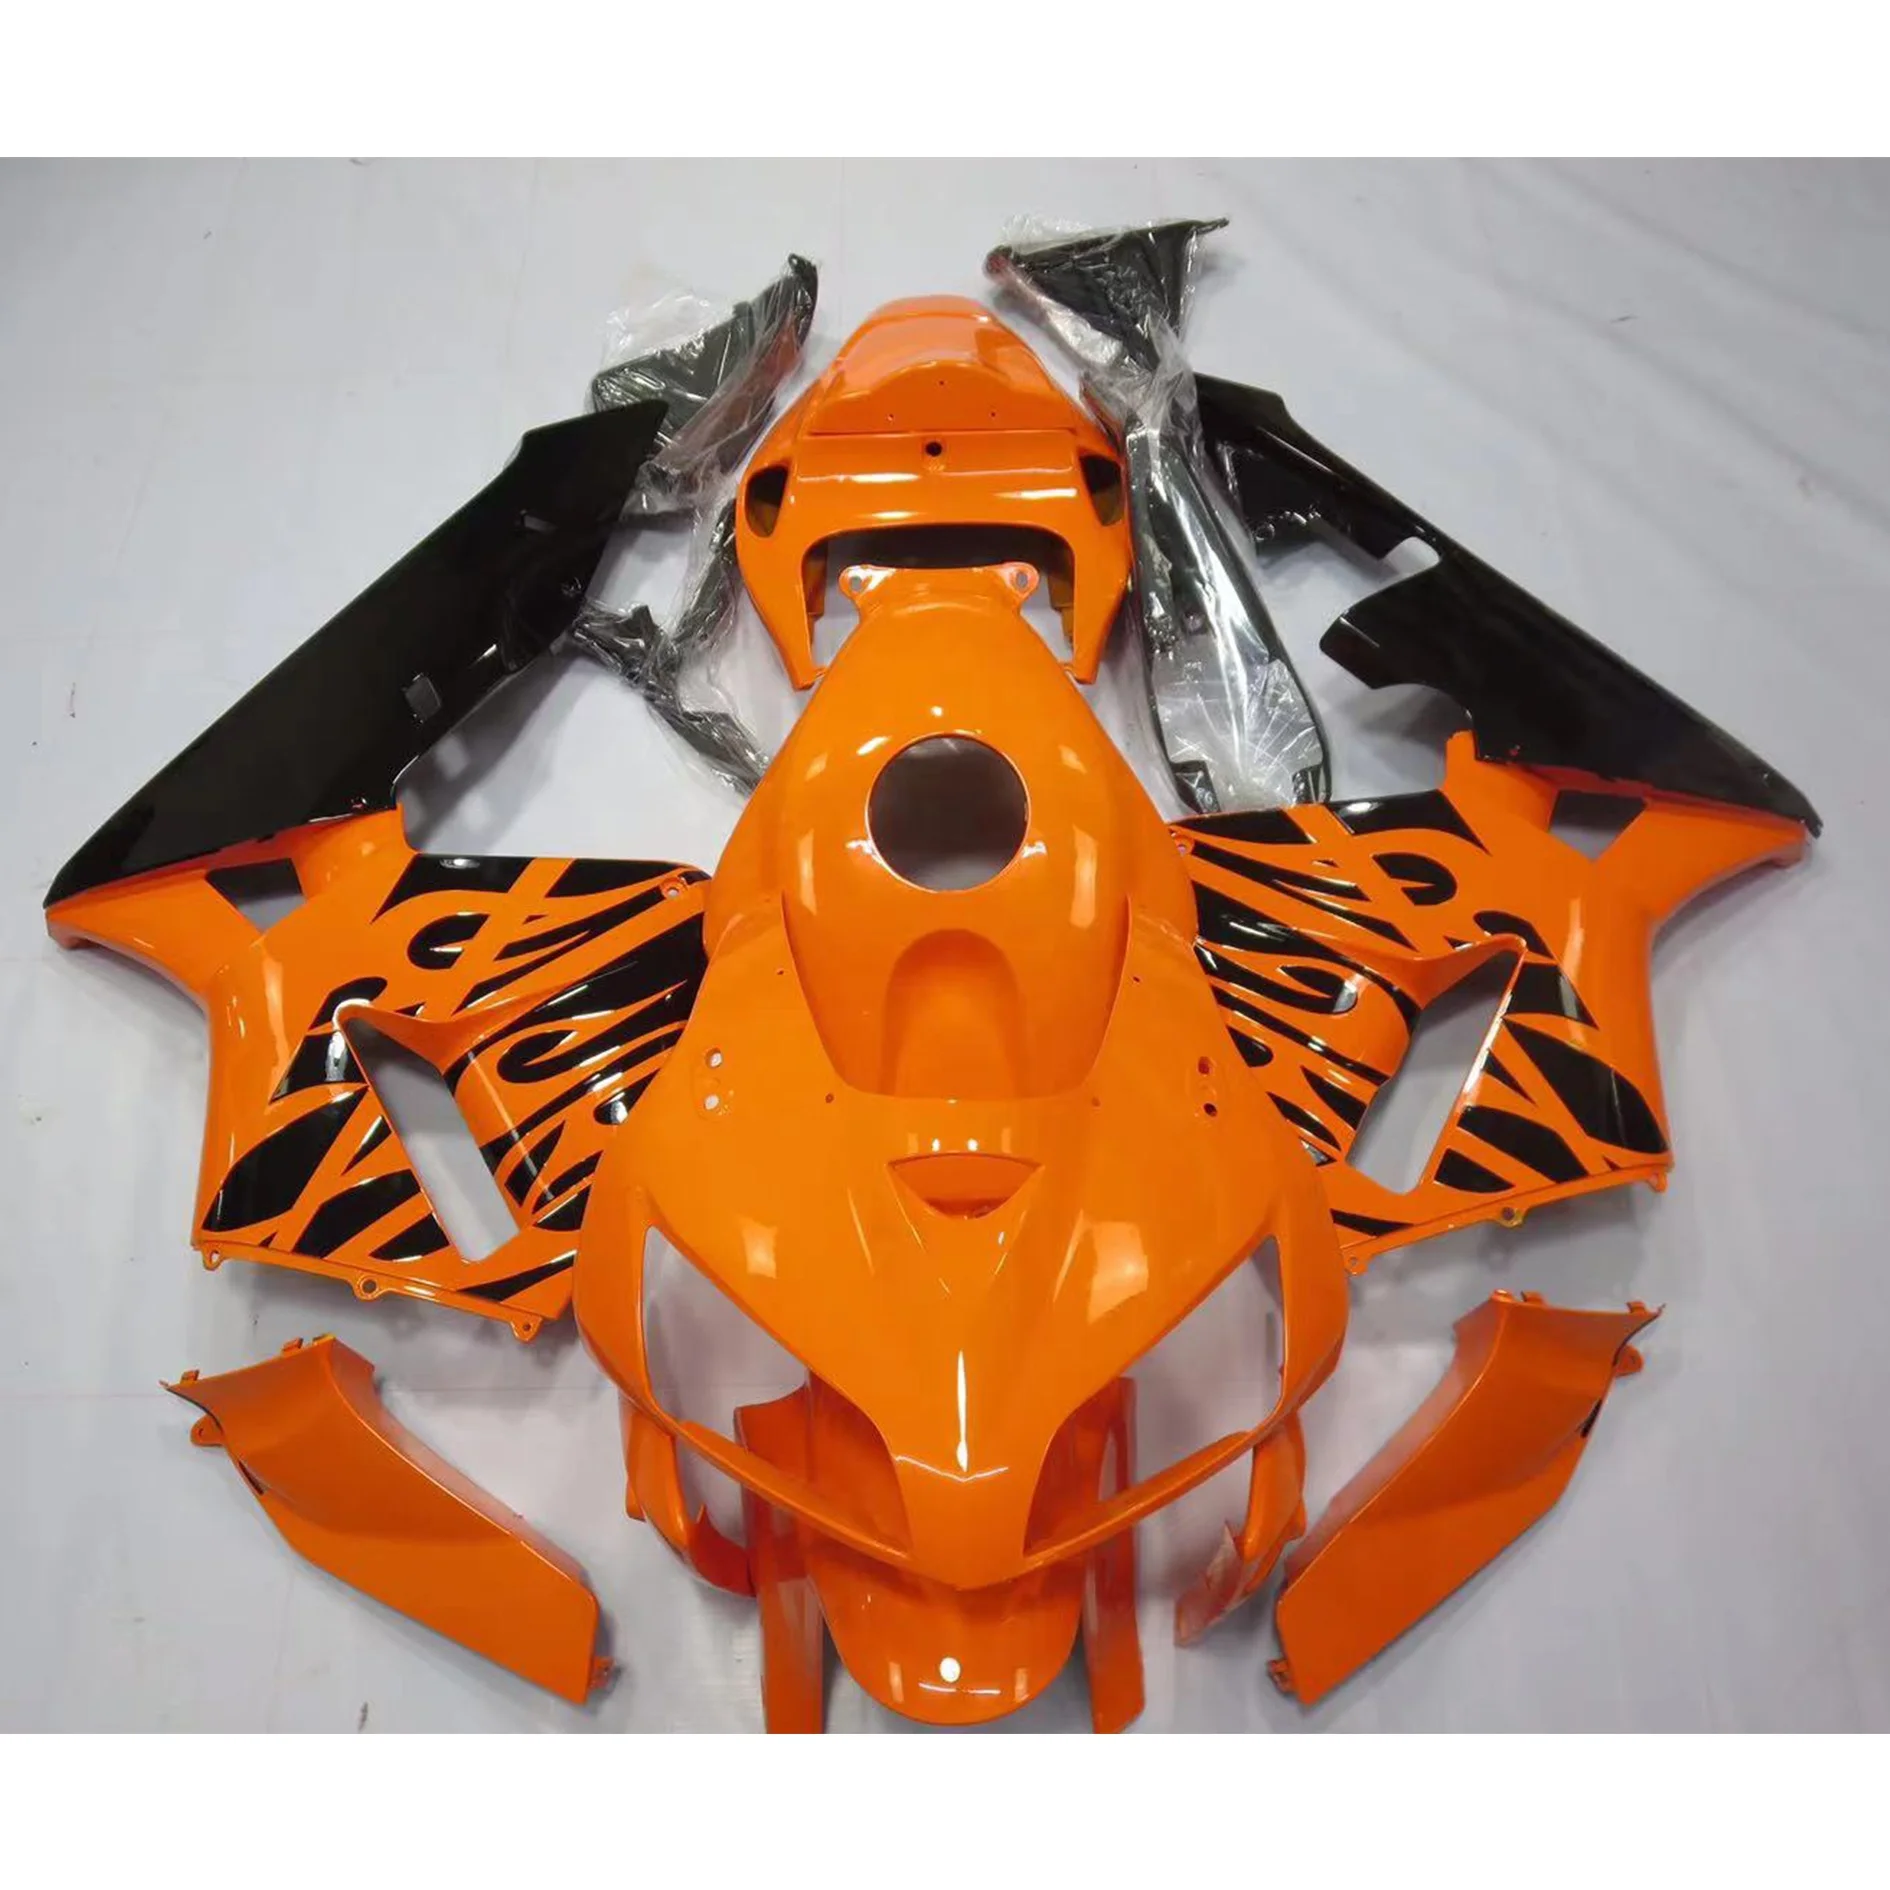 

2022 WHSC Orange Black Flame OEM Motorcycle Accessories For HONDA CBR600 RR 2005-2006 05 06 Motorcycle Body Systems Fairing Kits, Pictures shown